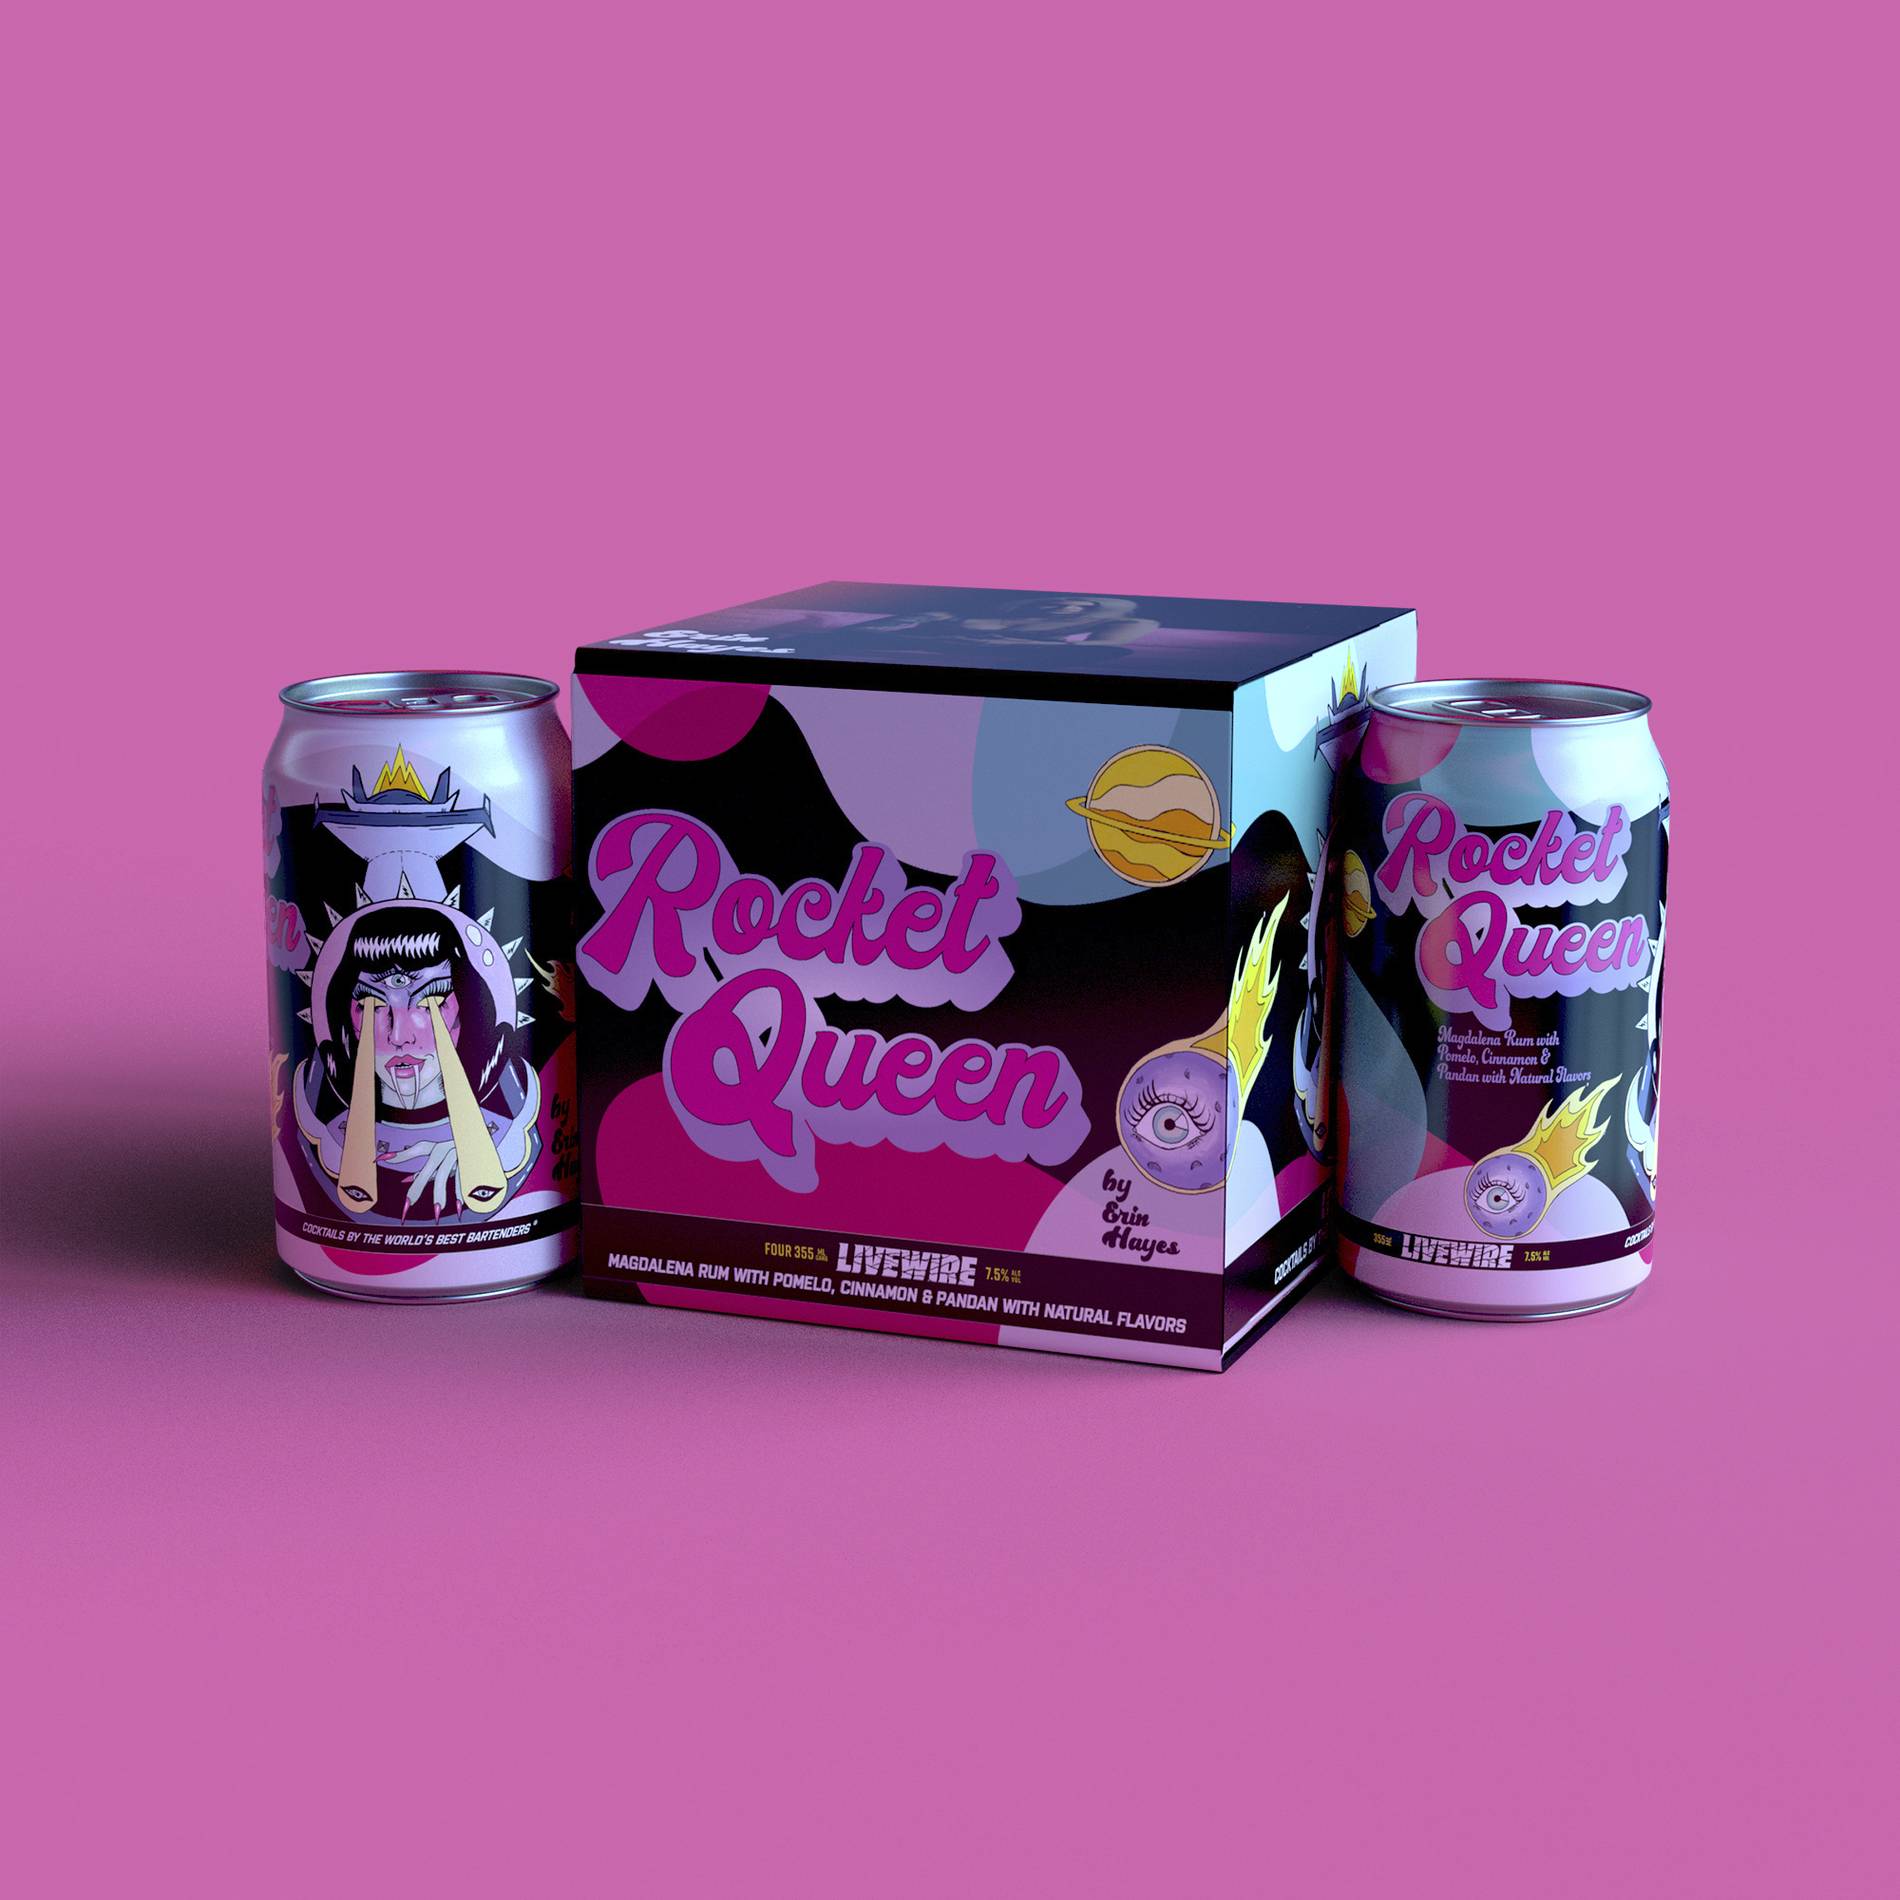 LiveWire Canned Cocktails, Rocket Queen packaging